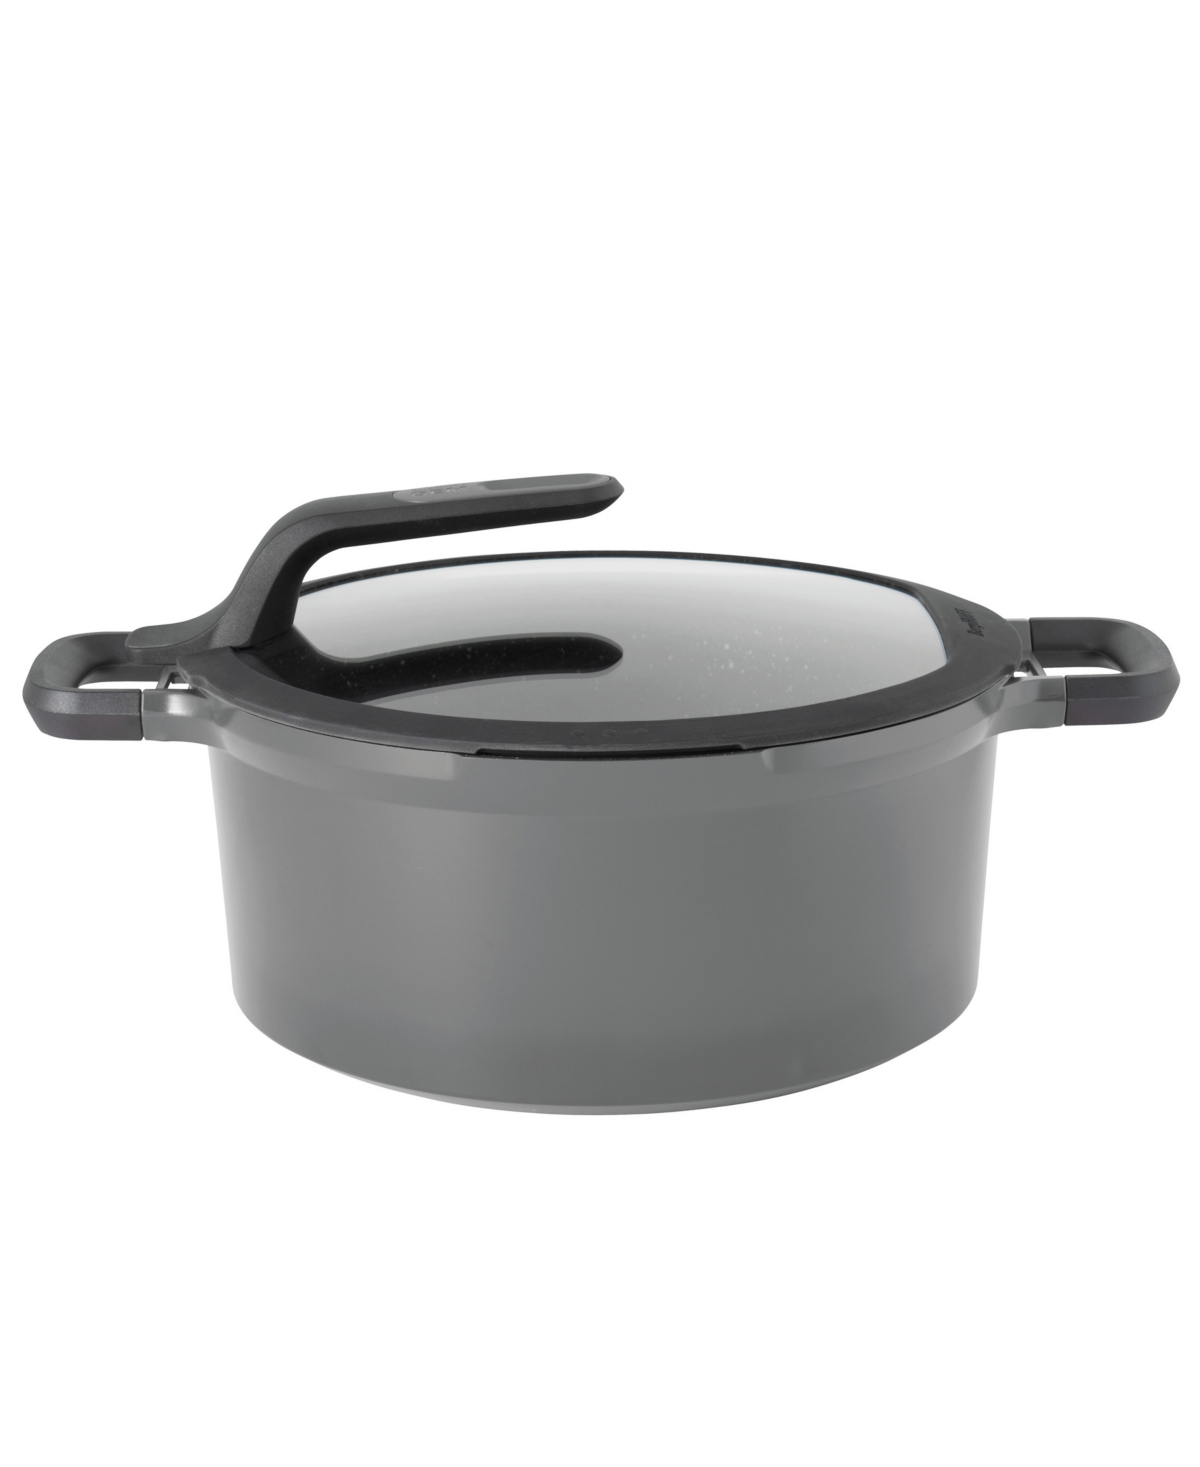 10272298 BergHOFF Gem Collection Nonstick 11 Covered Stockp sku 10272298